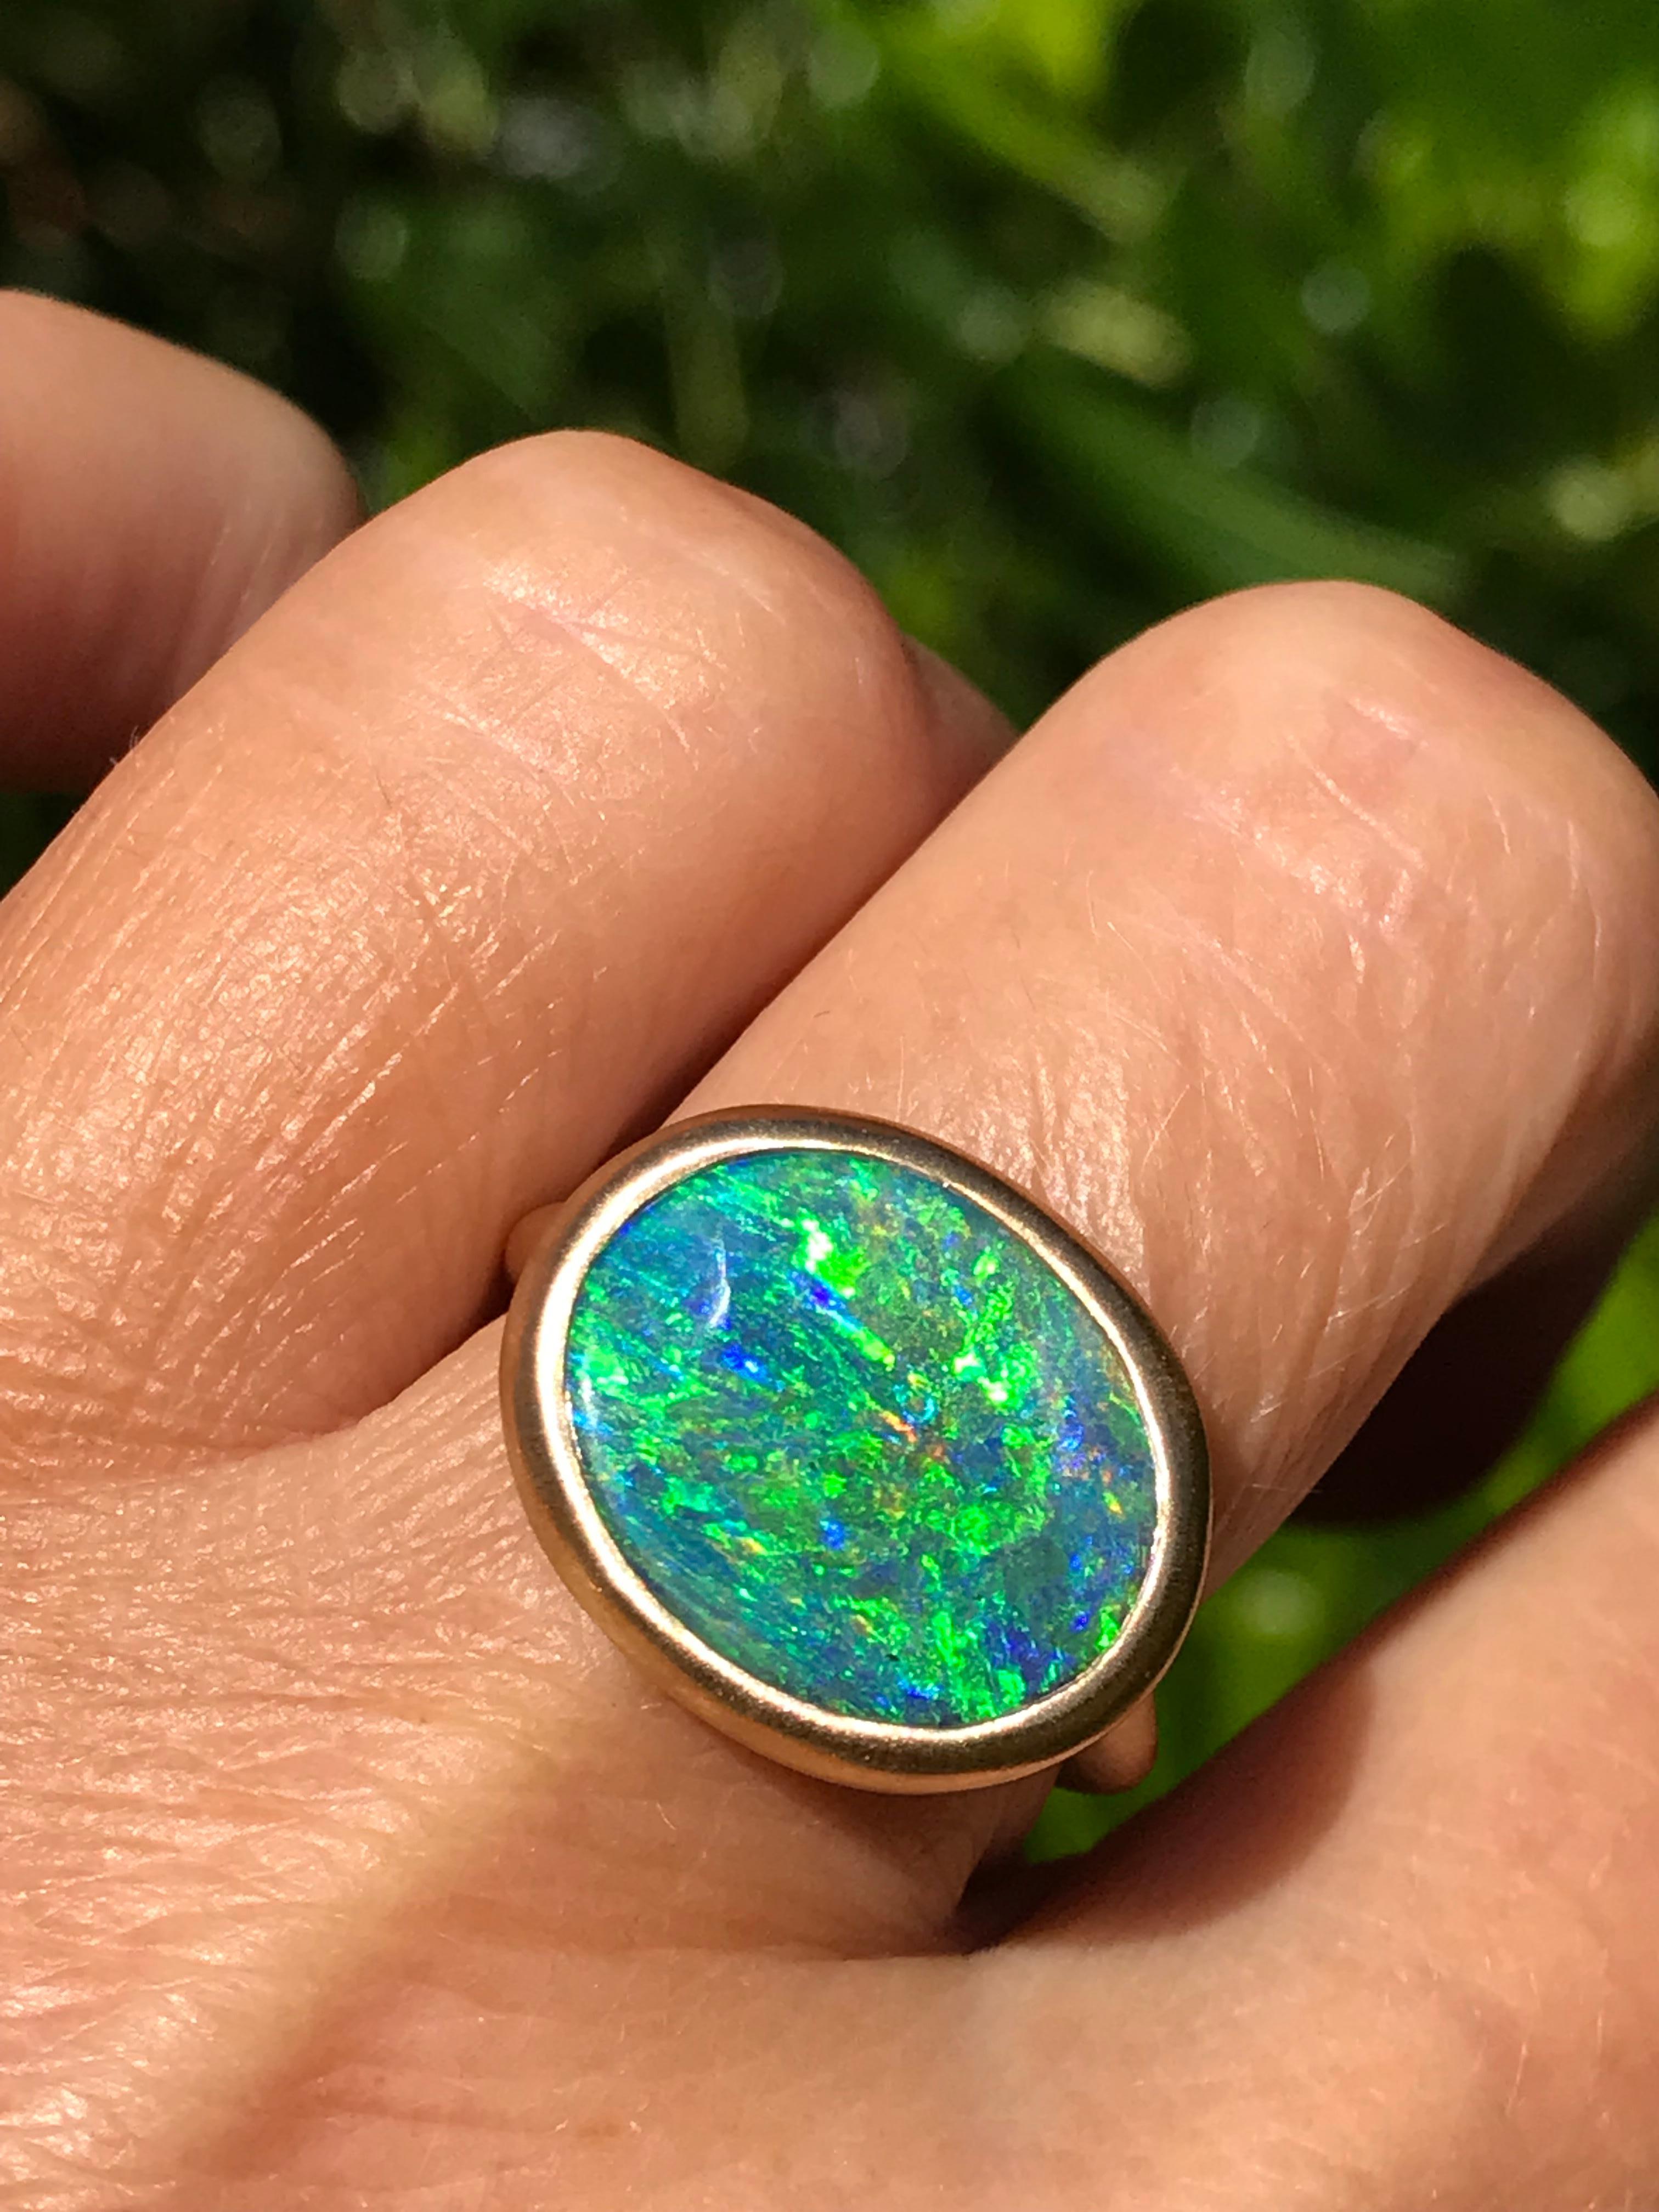 Dalben design 18k yellow gold satin finishing ring with a  7,4 carat bezel-set oval shape magnificent Queensland mine Australian boulder opal . 
The Australian Boulder Opal have deep blue and green spots.
Ring size US  7 1/4 - EU 55 re-sizable to